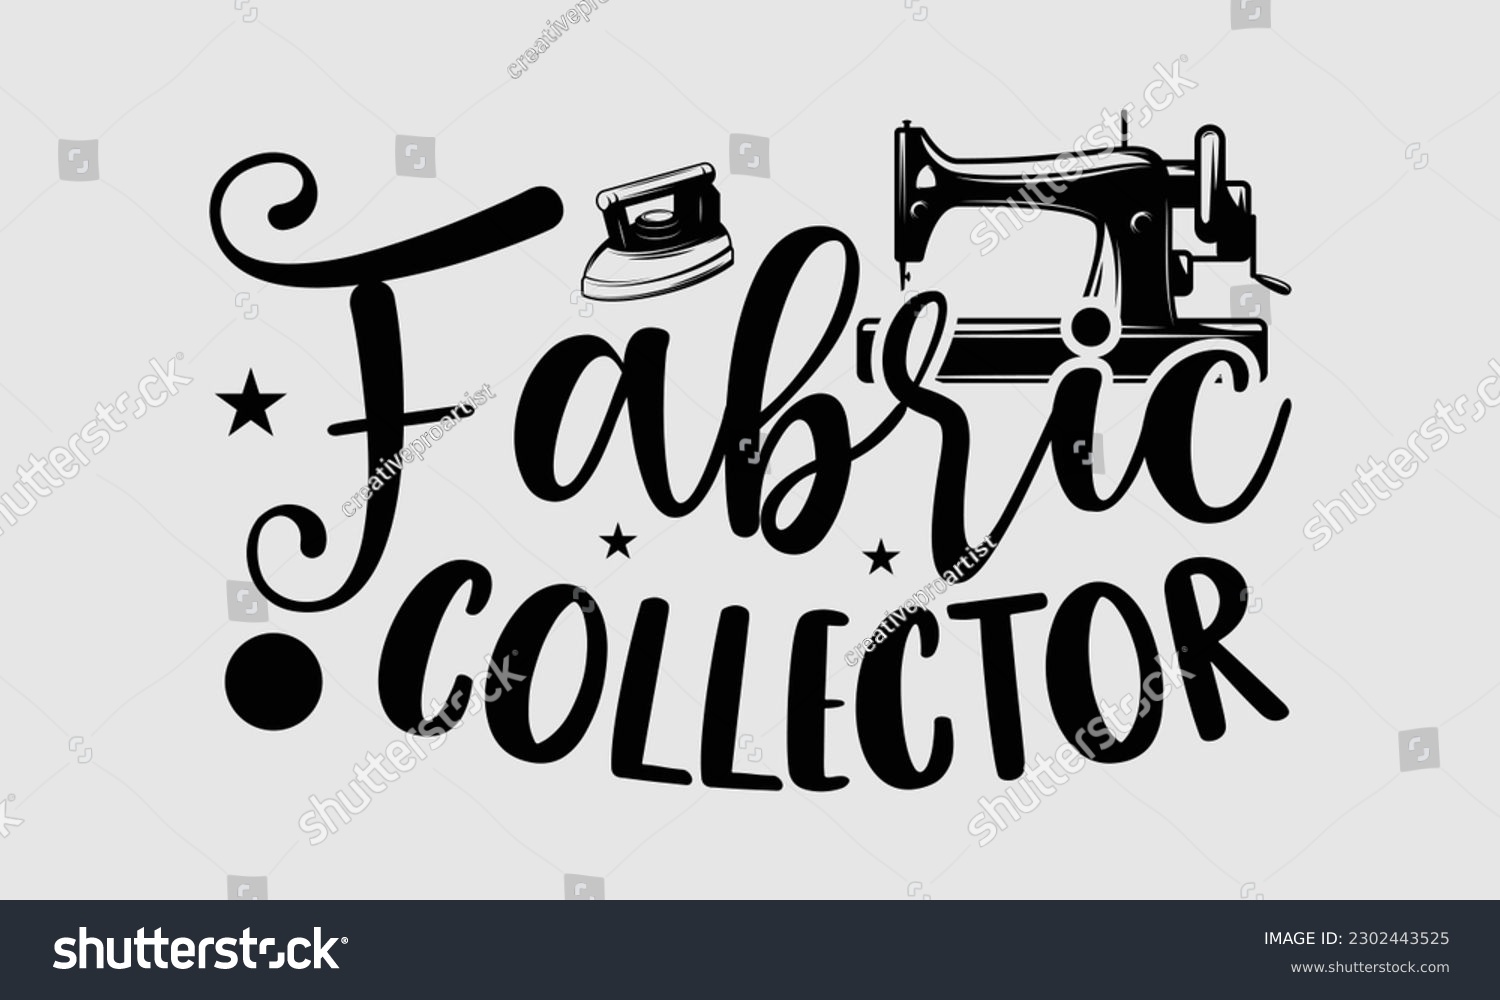 SVG of Fabric collector- Sewing t- shirt design, Hand drawn vintage illustration for prints on eps, svg Files for Cutting, greeting card template with typography text svg